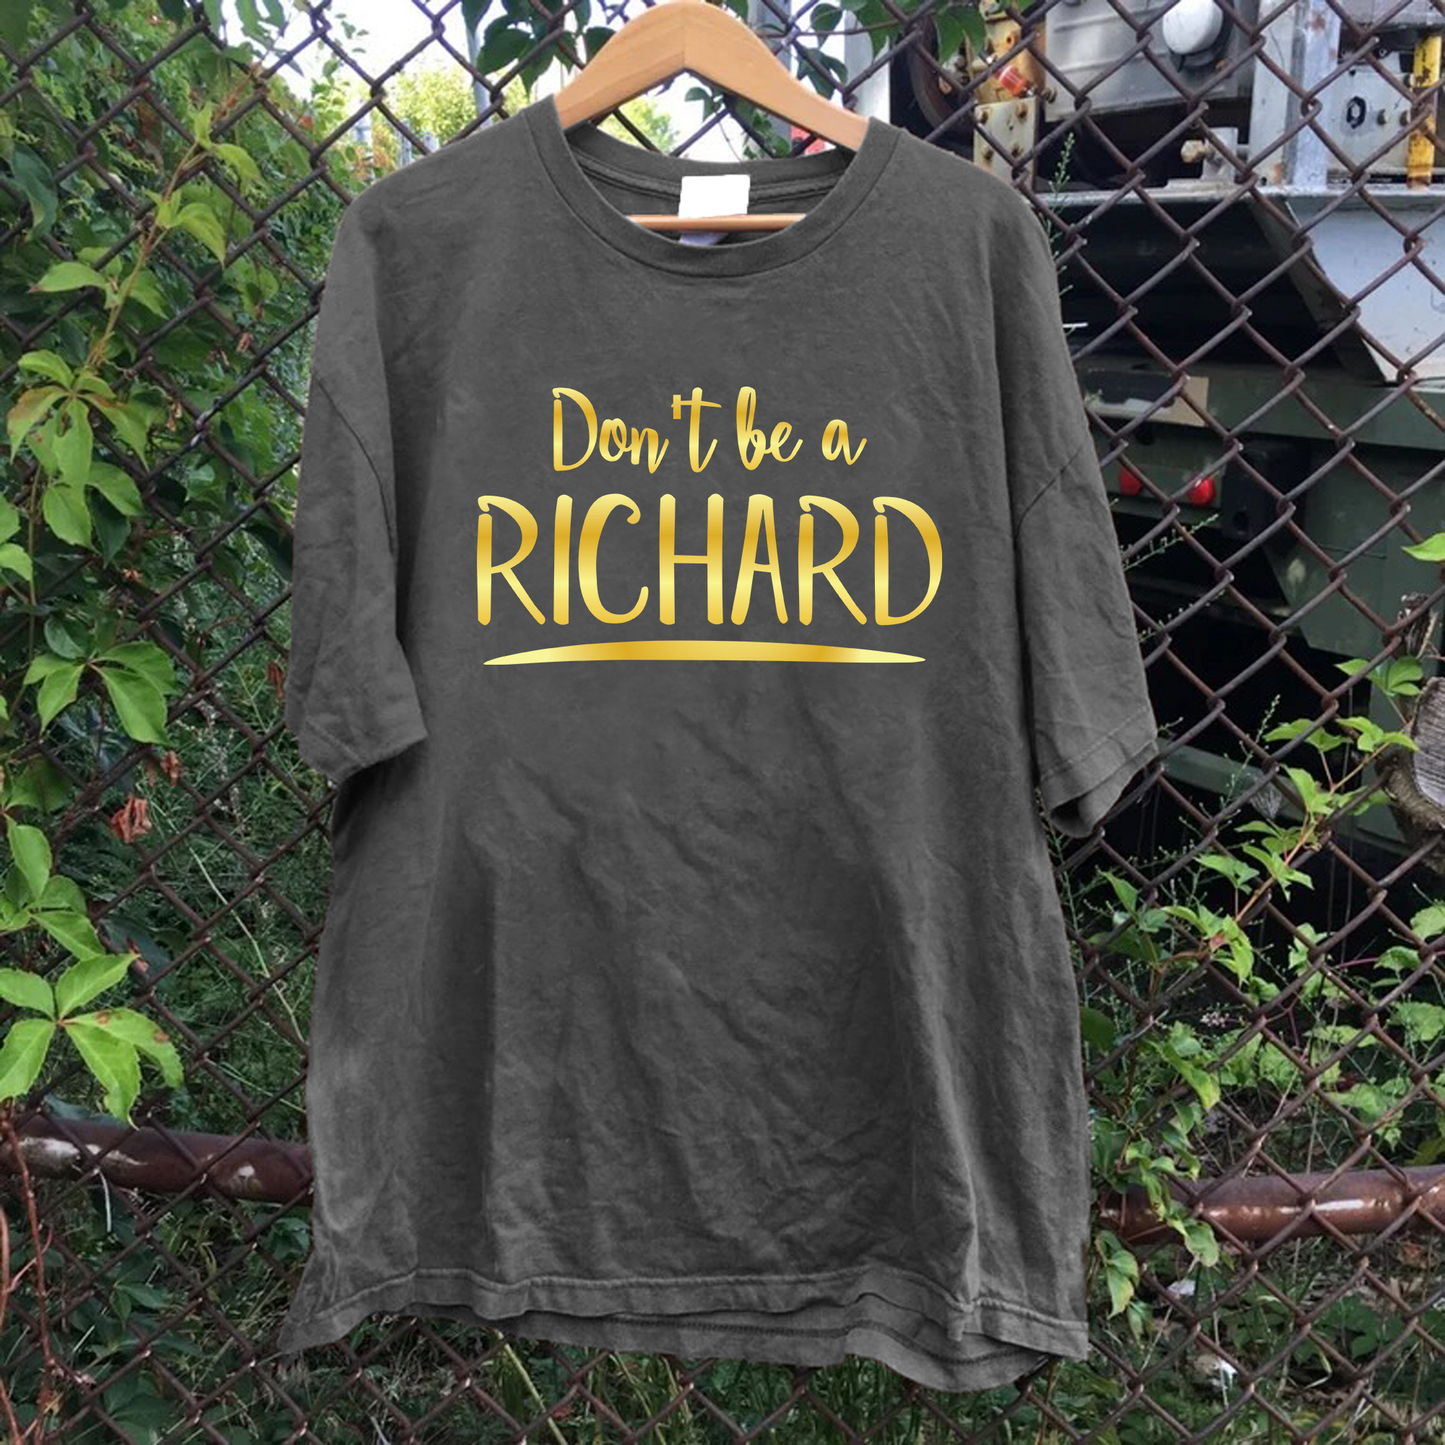 Don't Be a Richard Tee